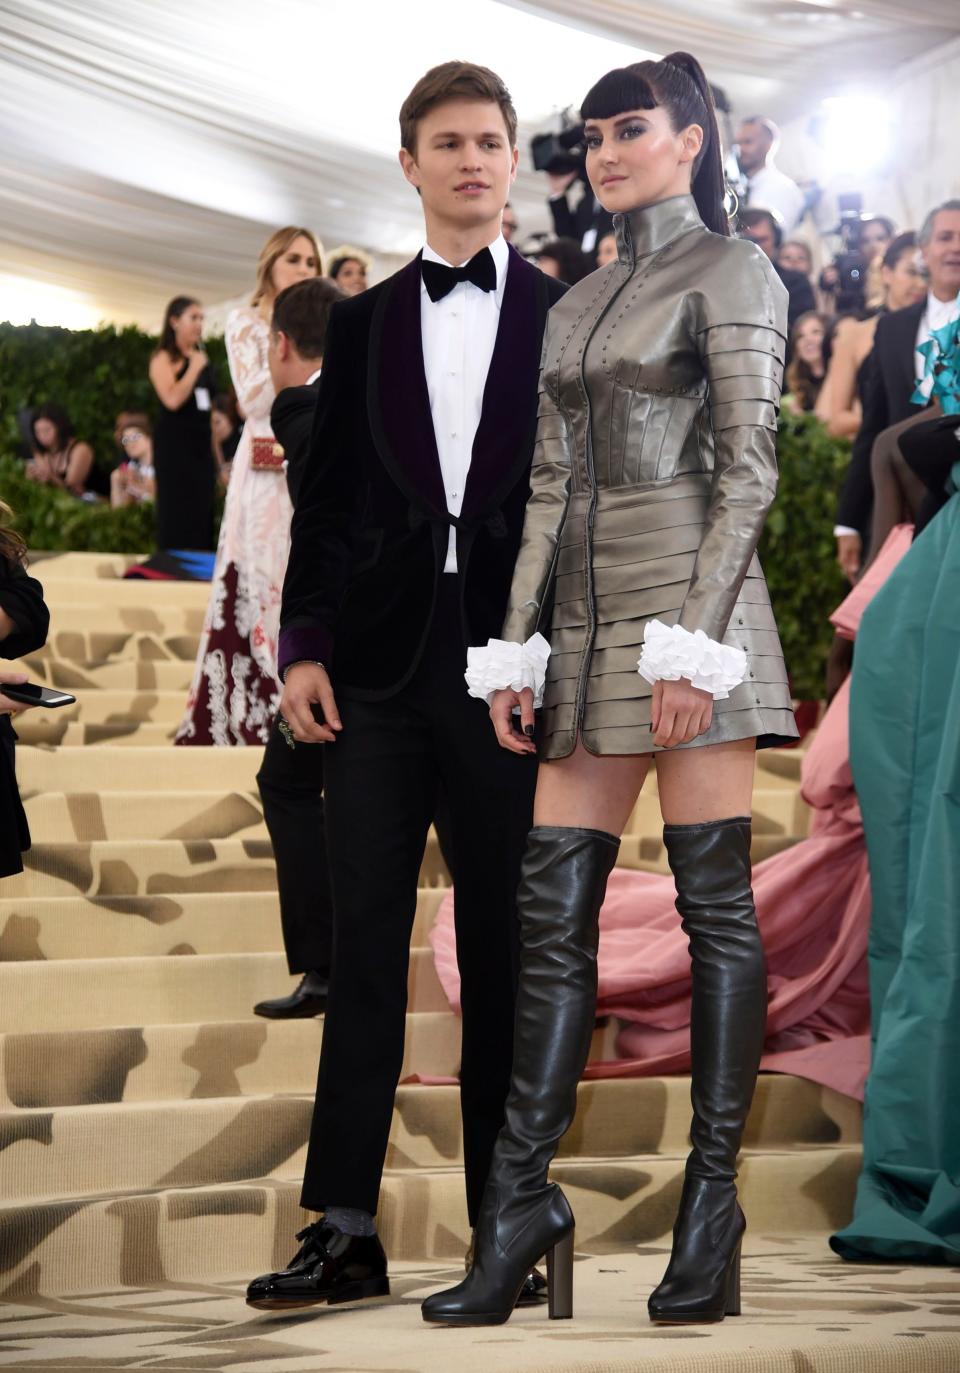 Ansel Elgort and Shailene Woodley at the 2018 Met Gala. (Photo: Shutterstock)